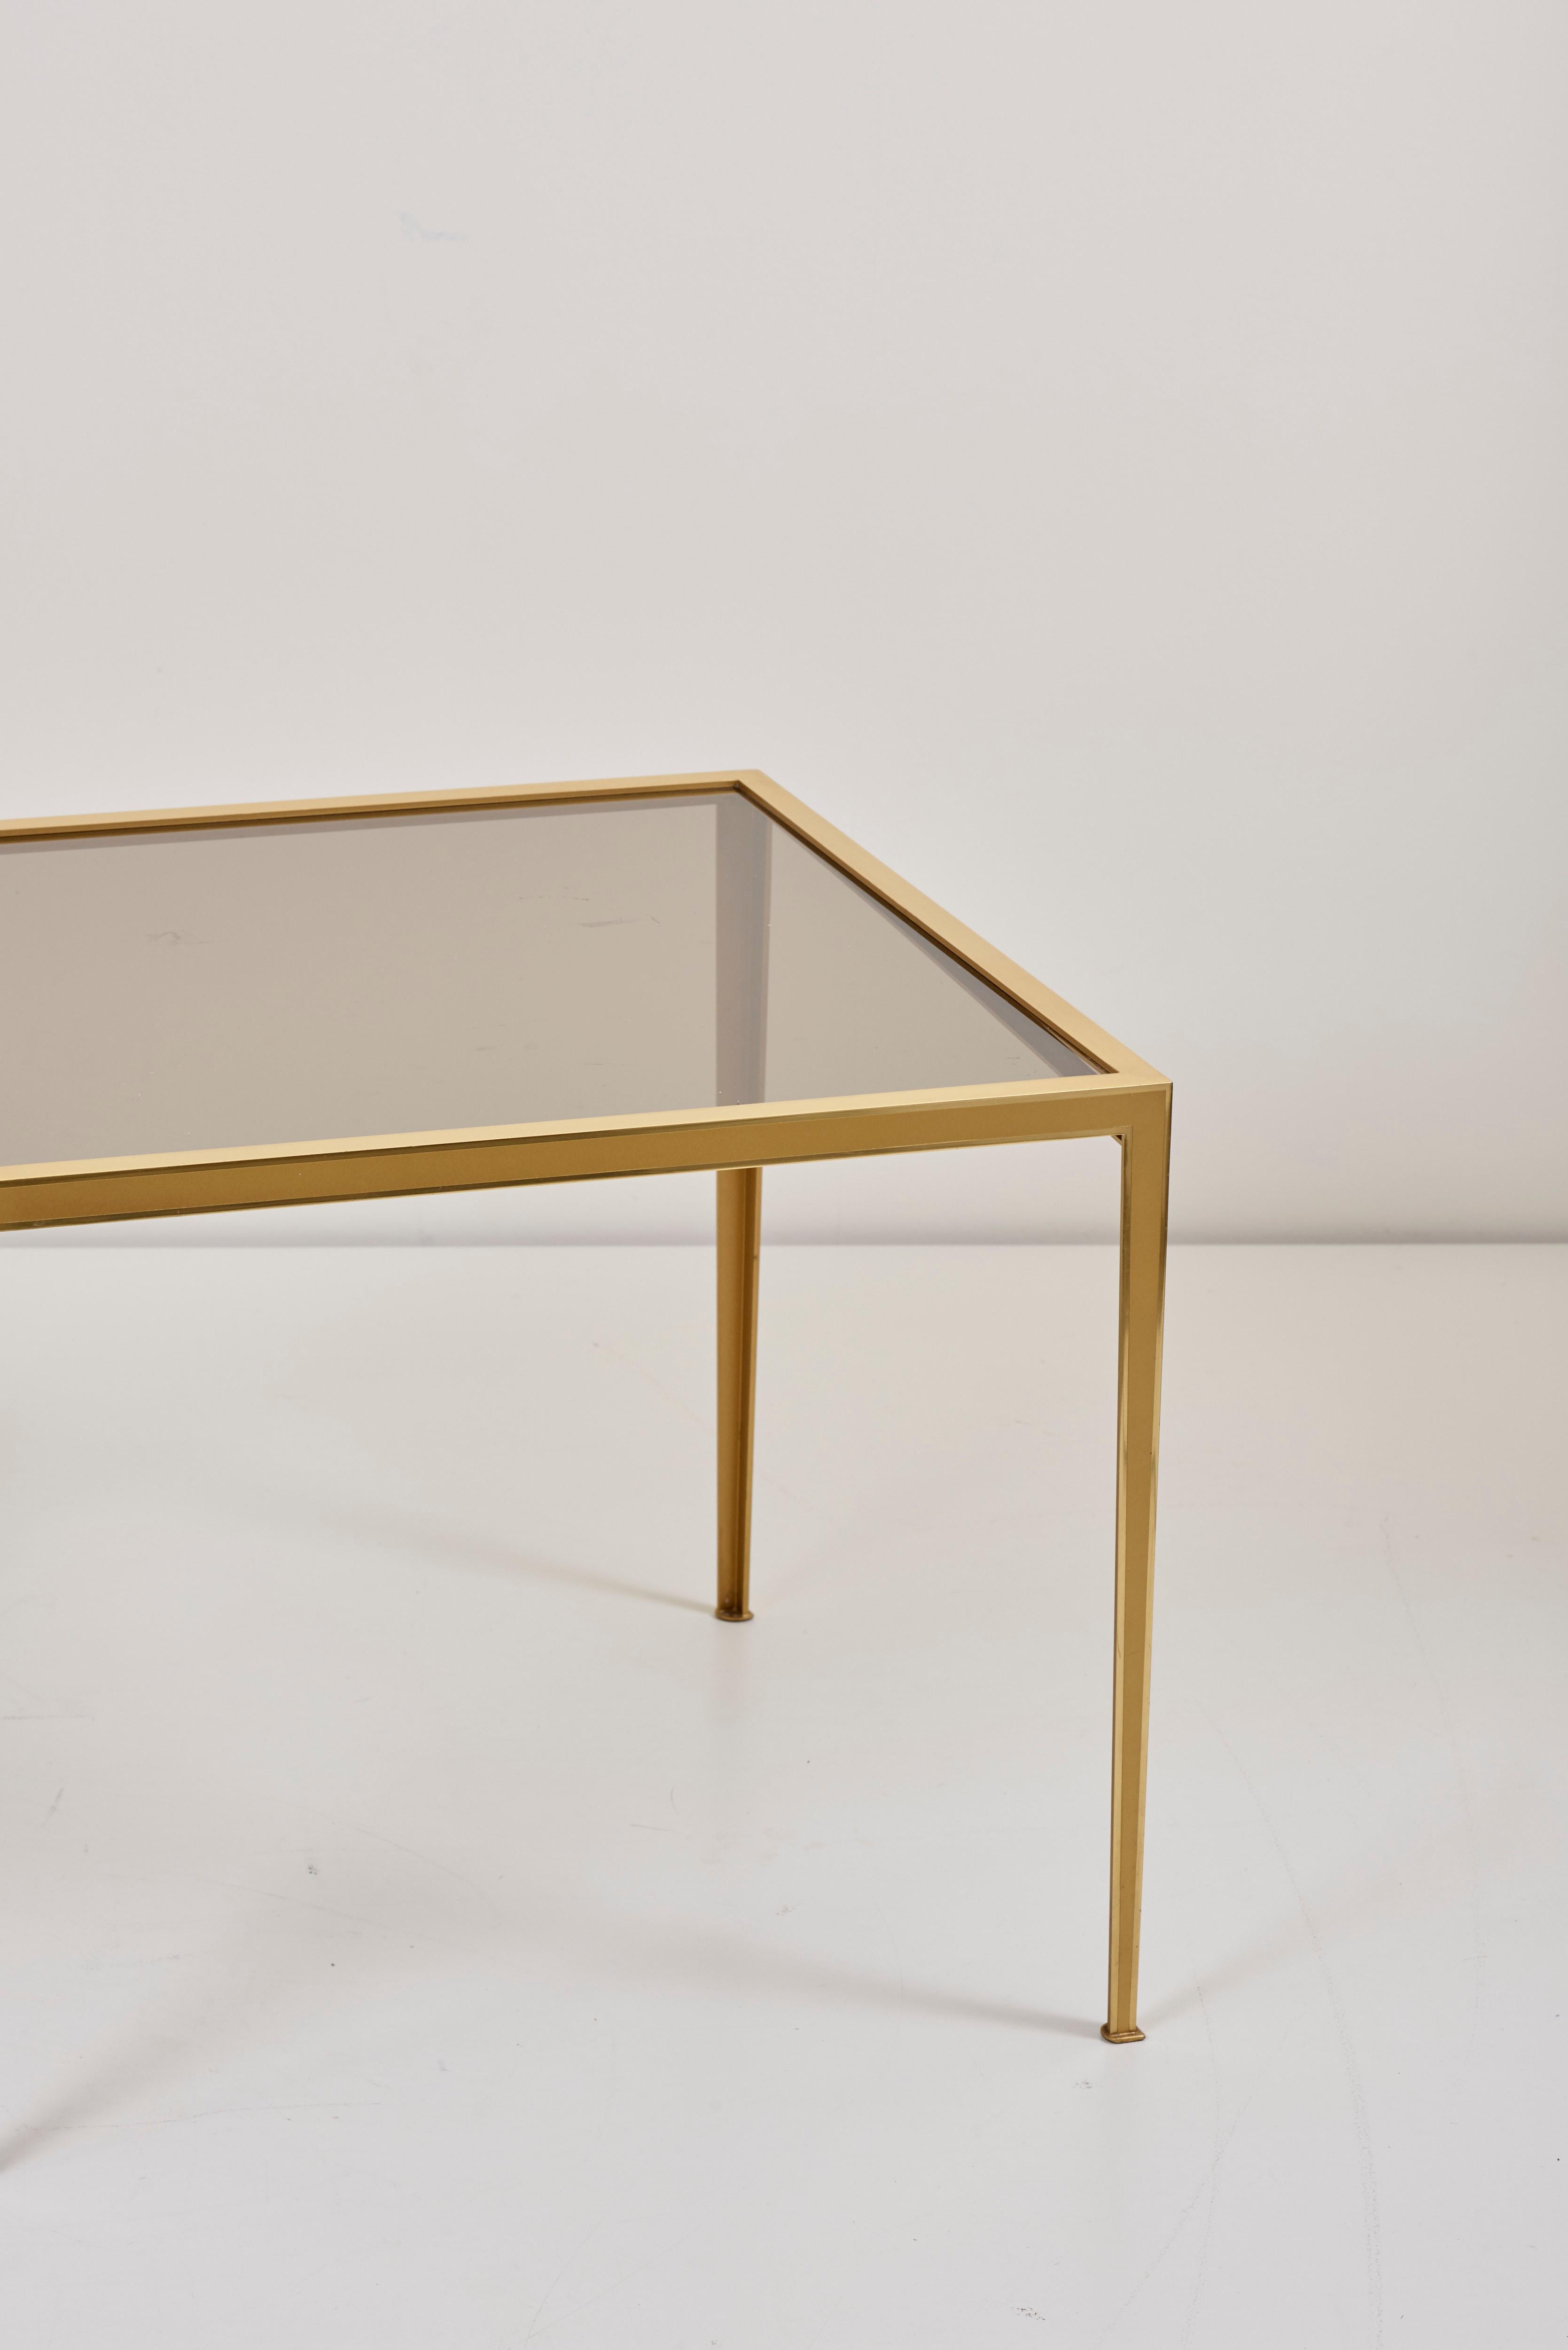 German Set of Two Brass and Glass Nesting Tables by Münchner Werkstätten